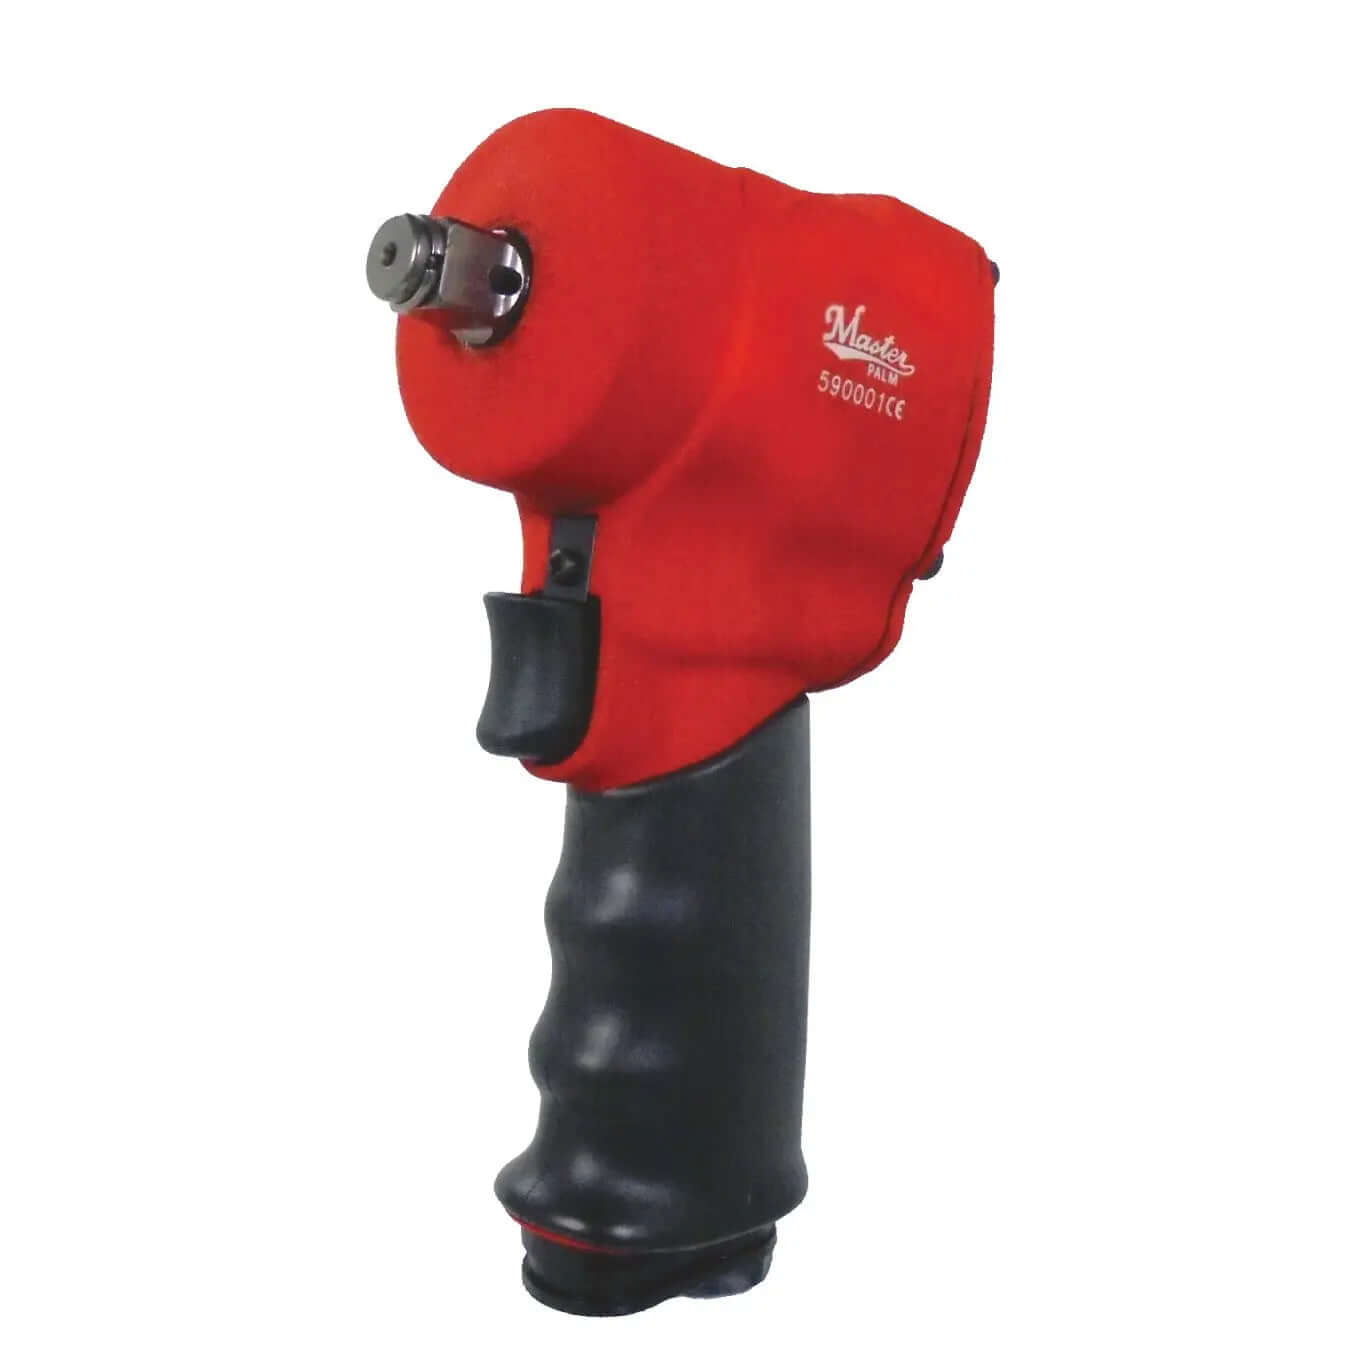 Featured High Torque Mini Size Air Impact Wrench